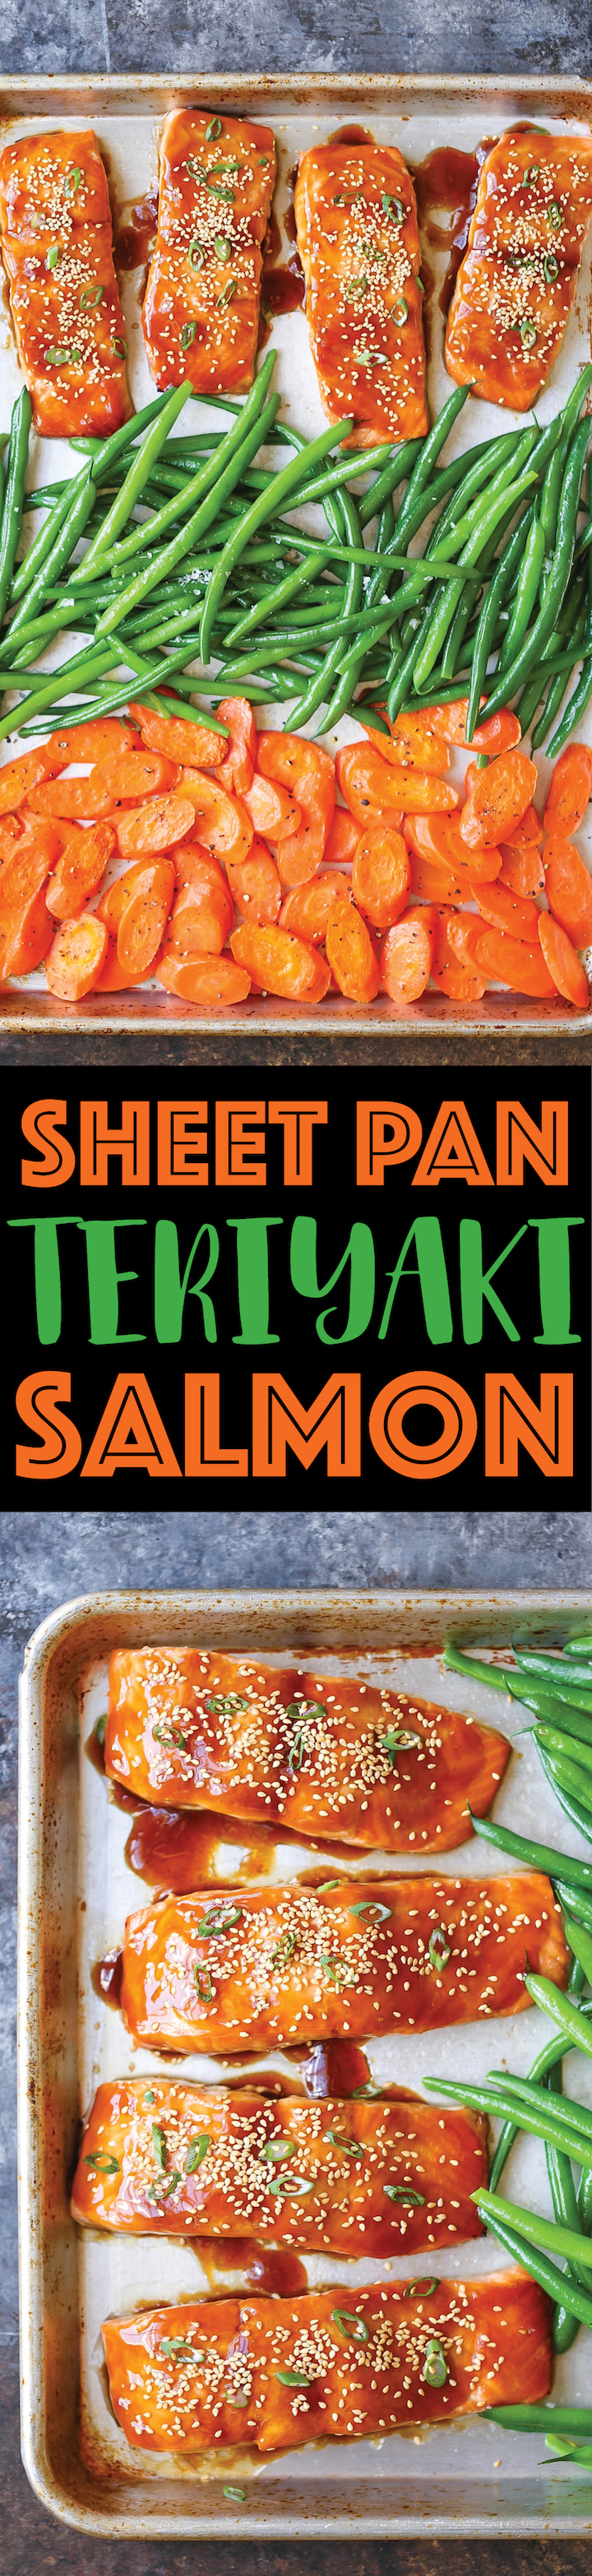 Sheet Pan Teriyaki Salmon - A one pan dinner! Quick. Fast. And so flavorful. With your veggies right alongside your main for the speediest clean up EVER!!!